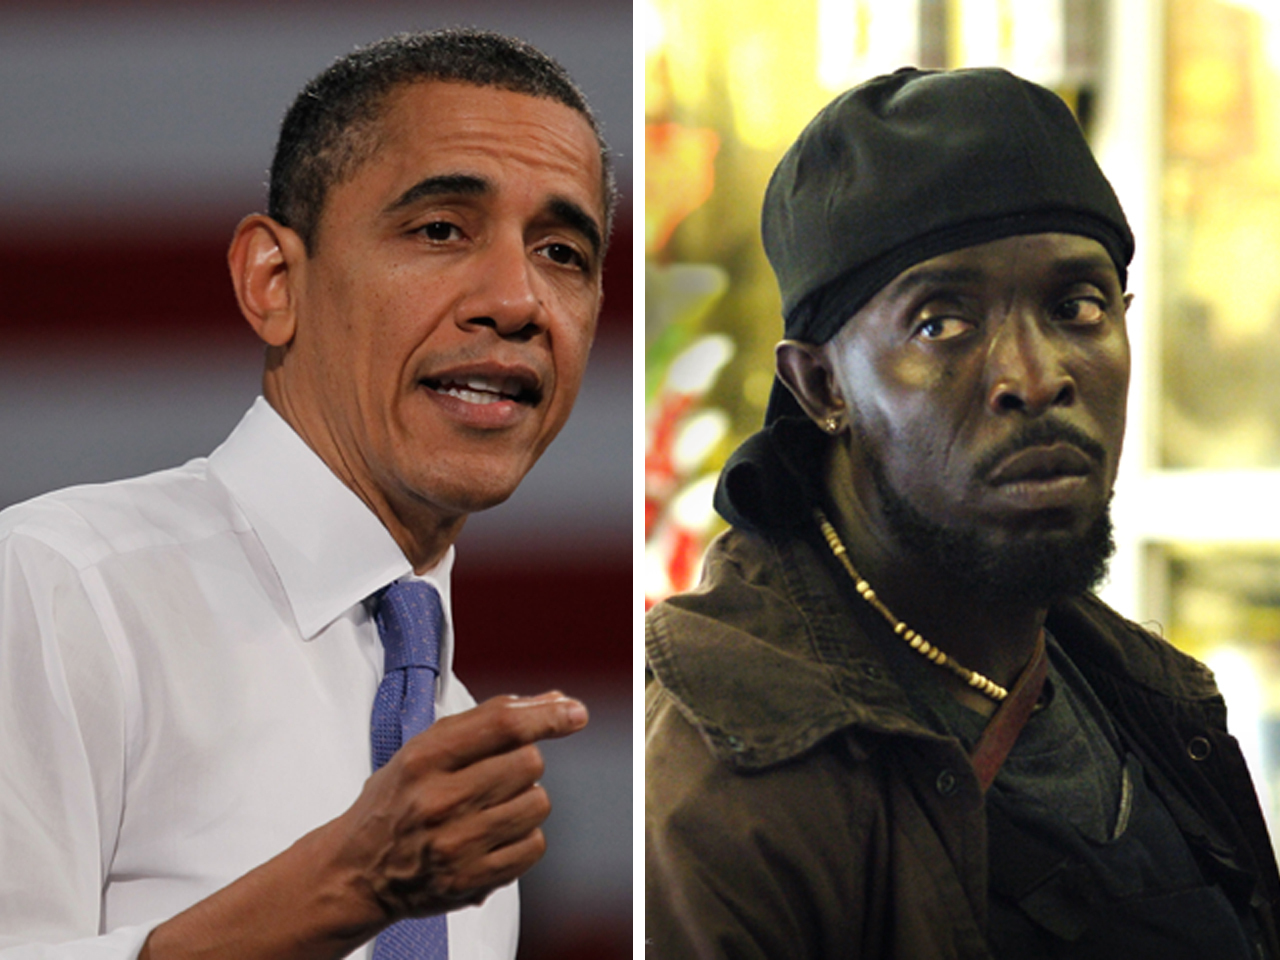 President Obama: Omar Little was the best character on The Wire